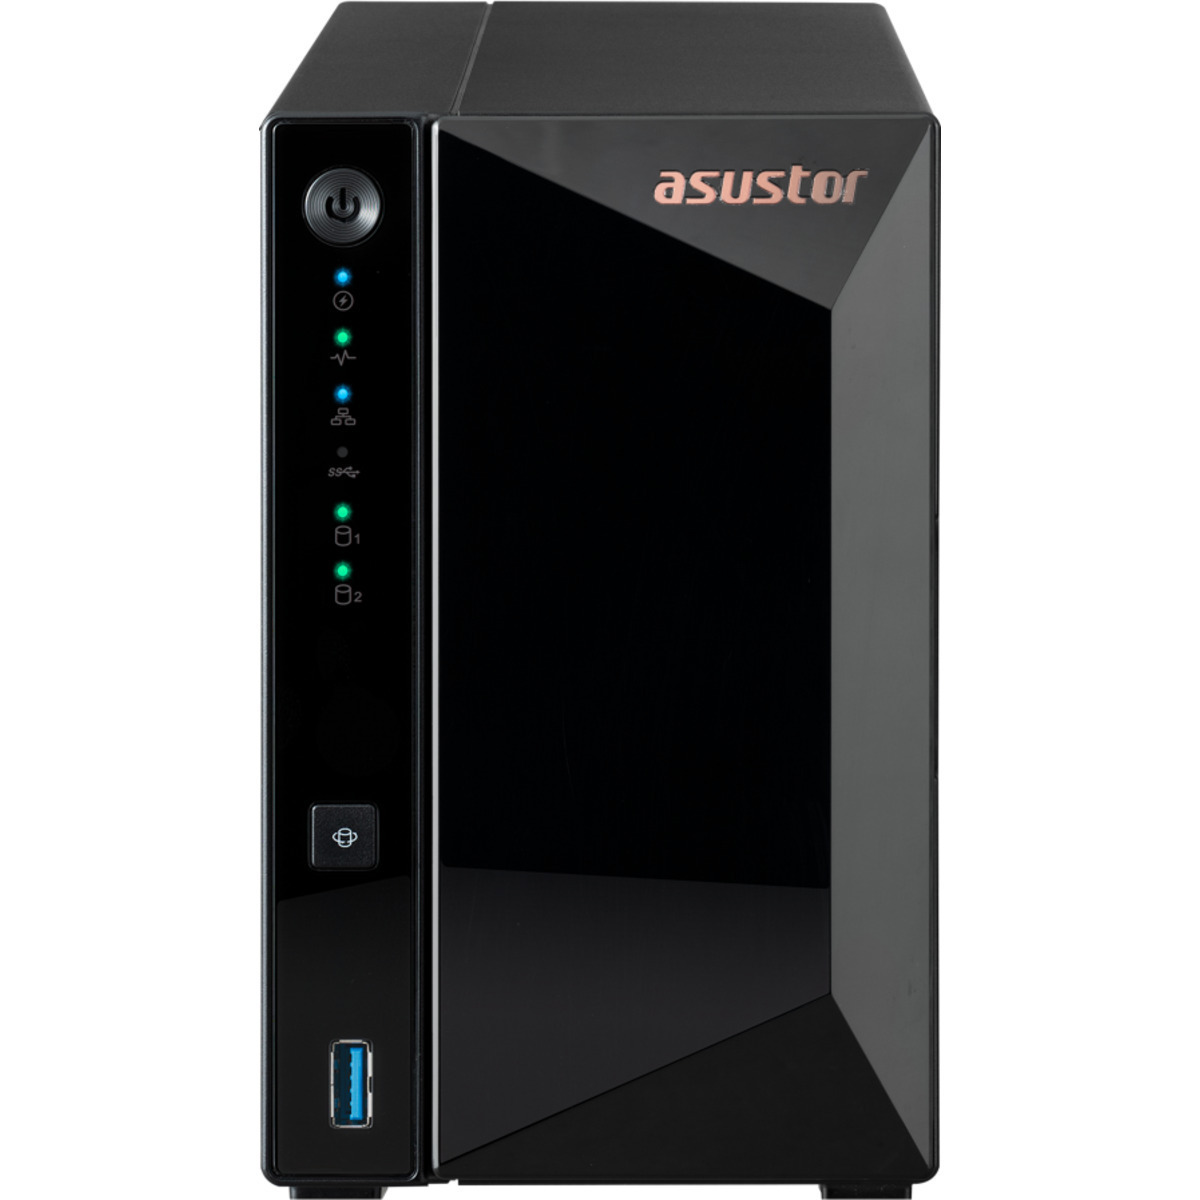 ASUSTOR DRIVESTOR 2 Pro AS3302T 48tb 2-Bay Desktop Personal / Basic Home / Small Office NAS - Network Attached Storage Device 2x24tb Seagate IronWolf Pro ST24000NT002 3.5 7200rpm SATA 6Gb/s HDD NAS Class Drives Installed - Burn-In Tested DRIVESTOR 2 Pro AS3302T